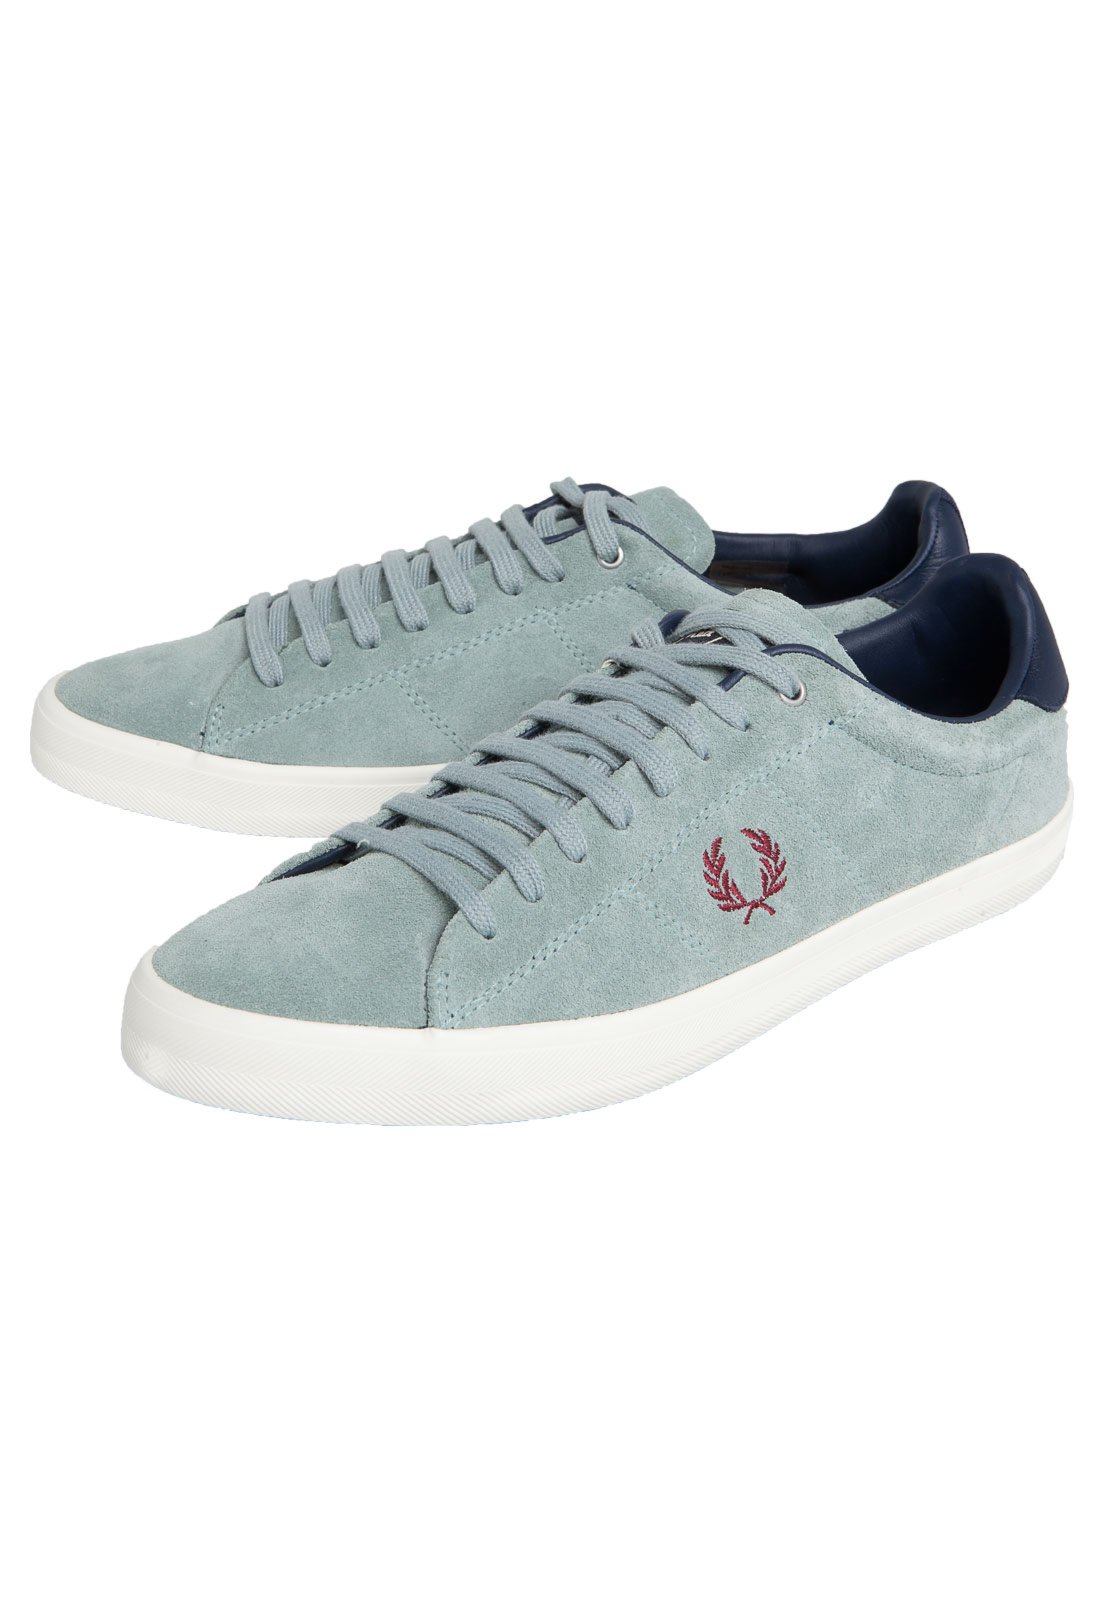 sapatenis fred perry